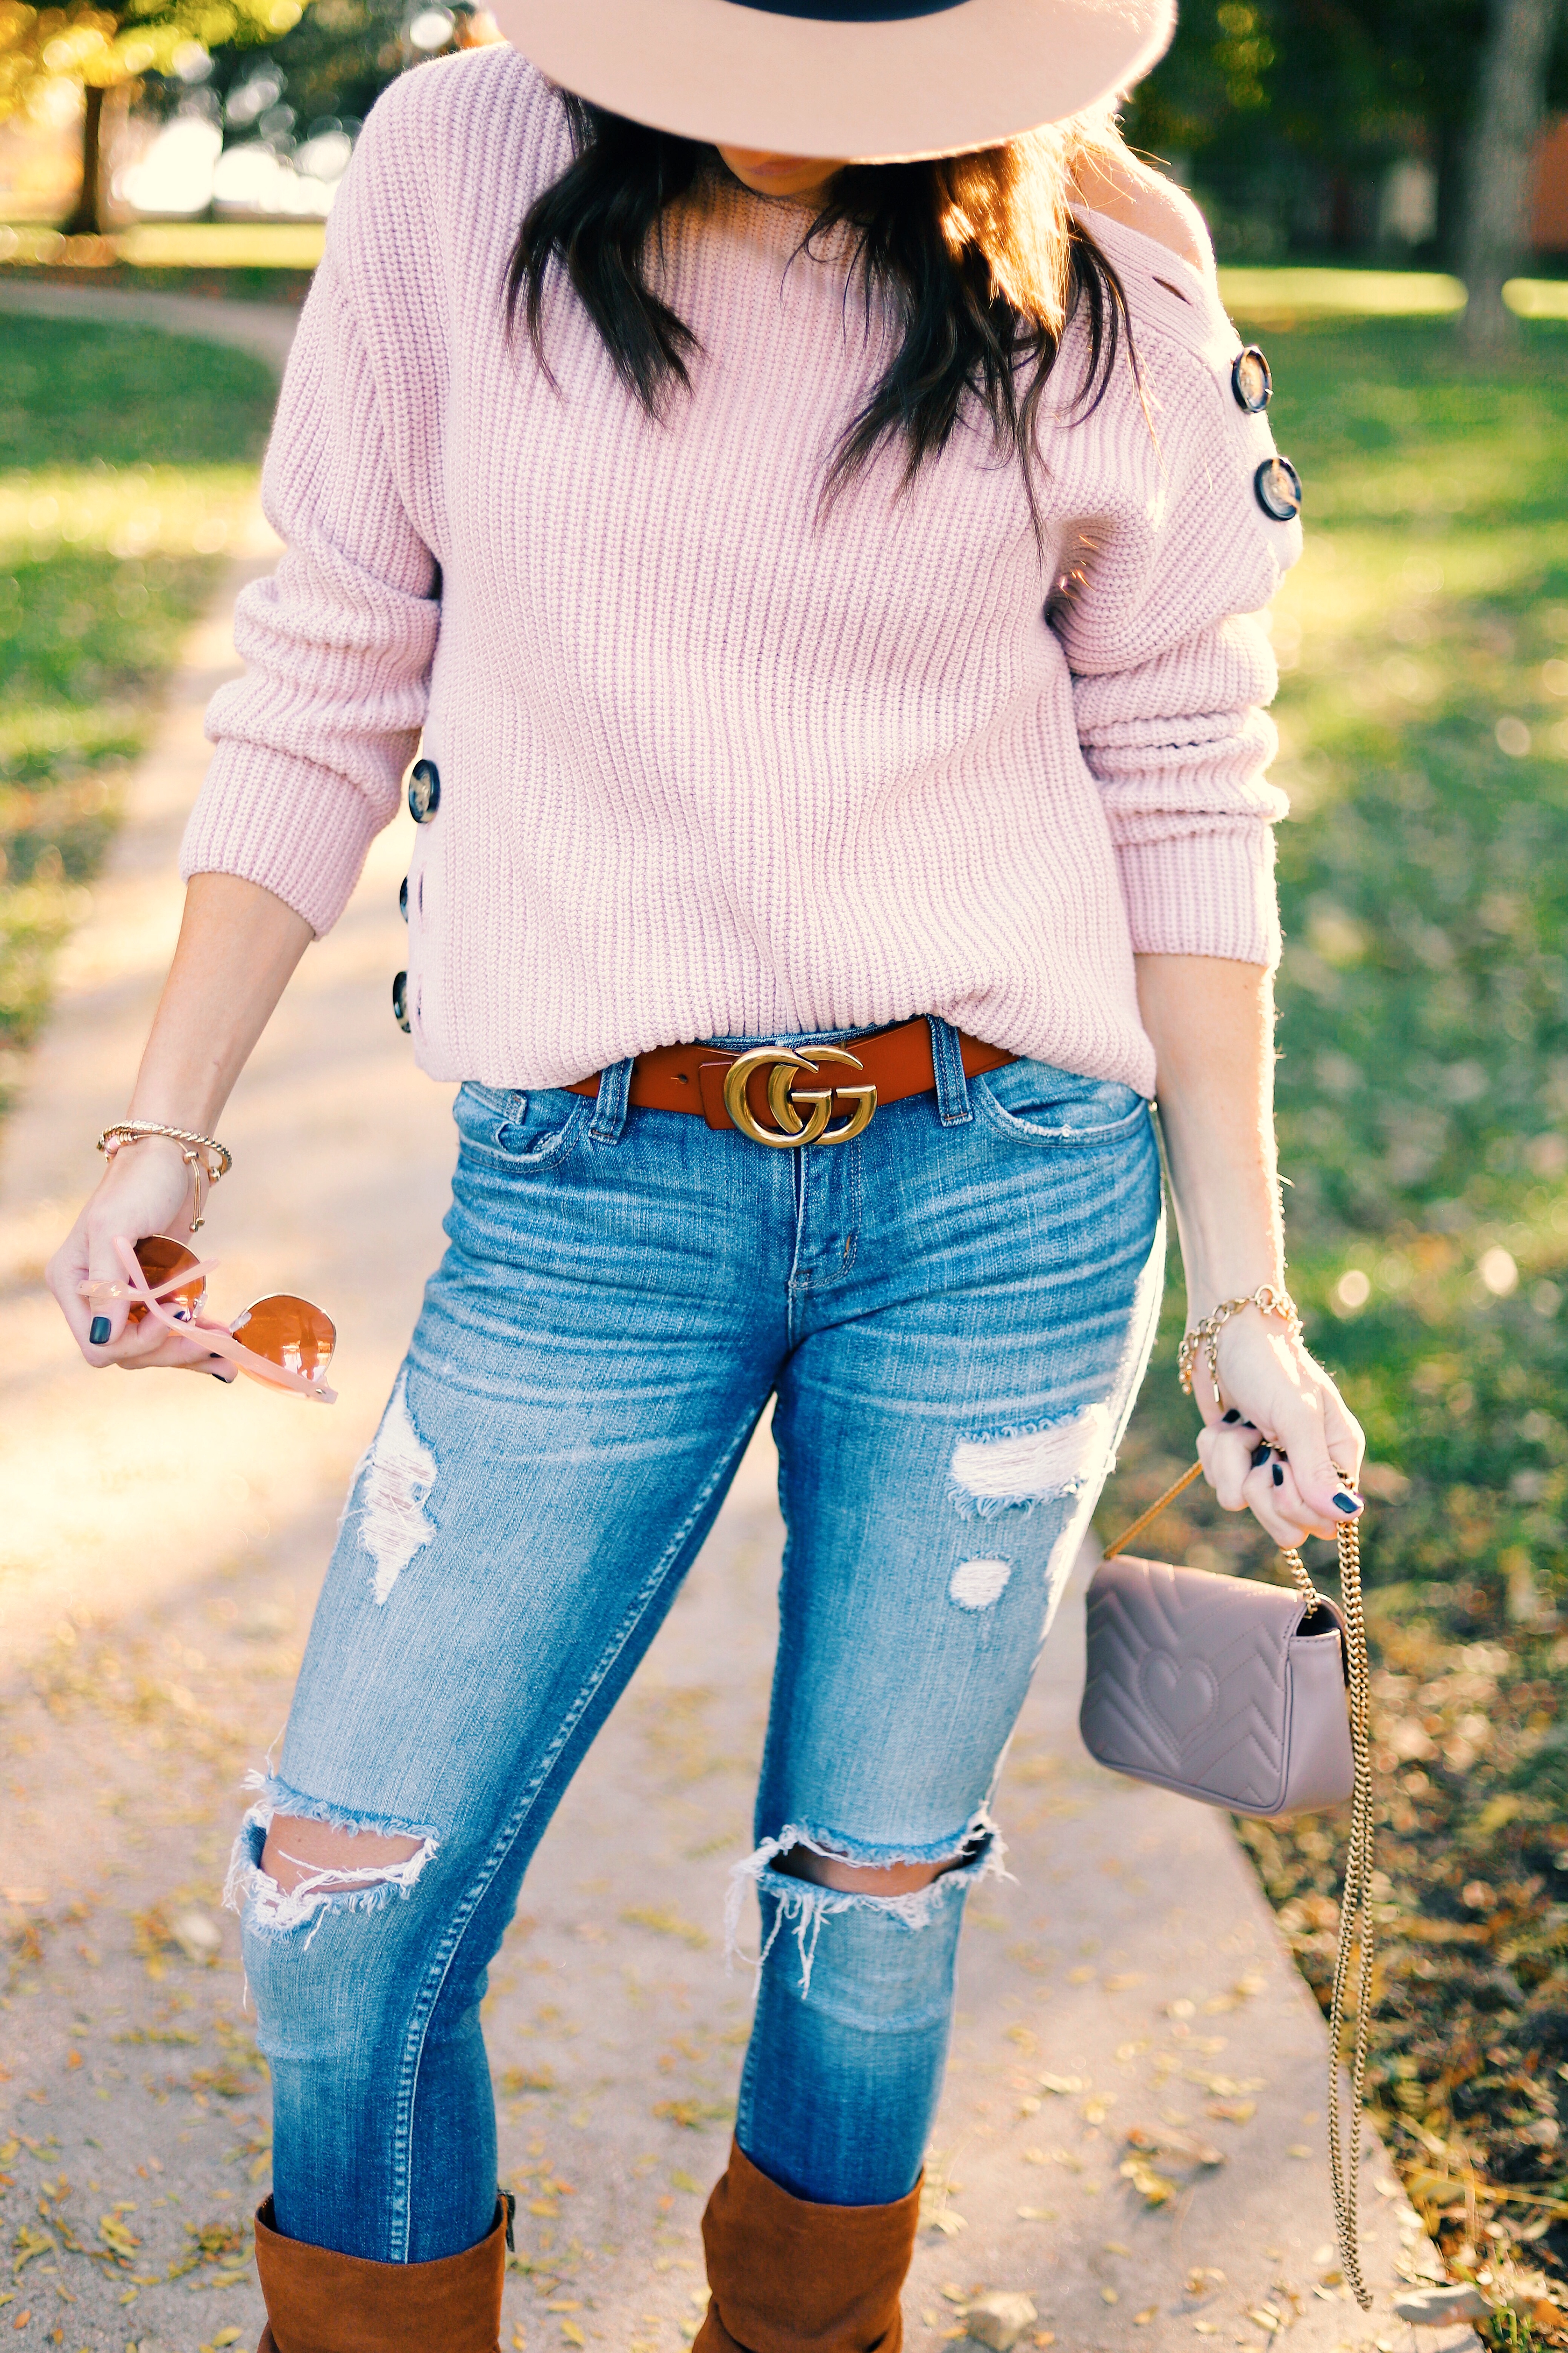 Button Shoulder Sweater Revolve Felt Hat Brown Gucci Belt Distressed Denim Brown Chinese Laundry Boots Gucci Purse